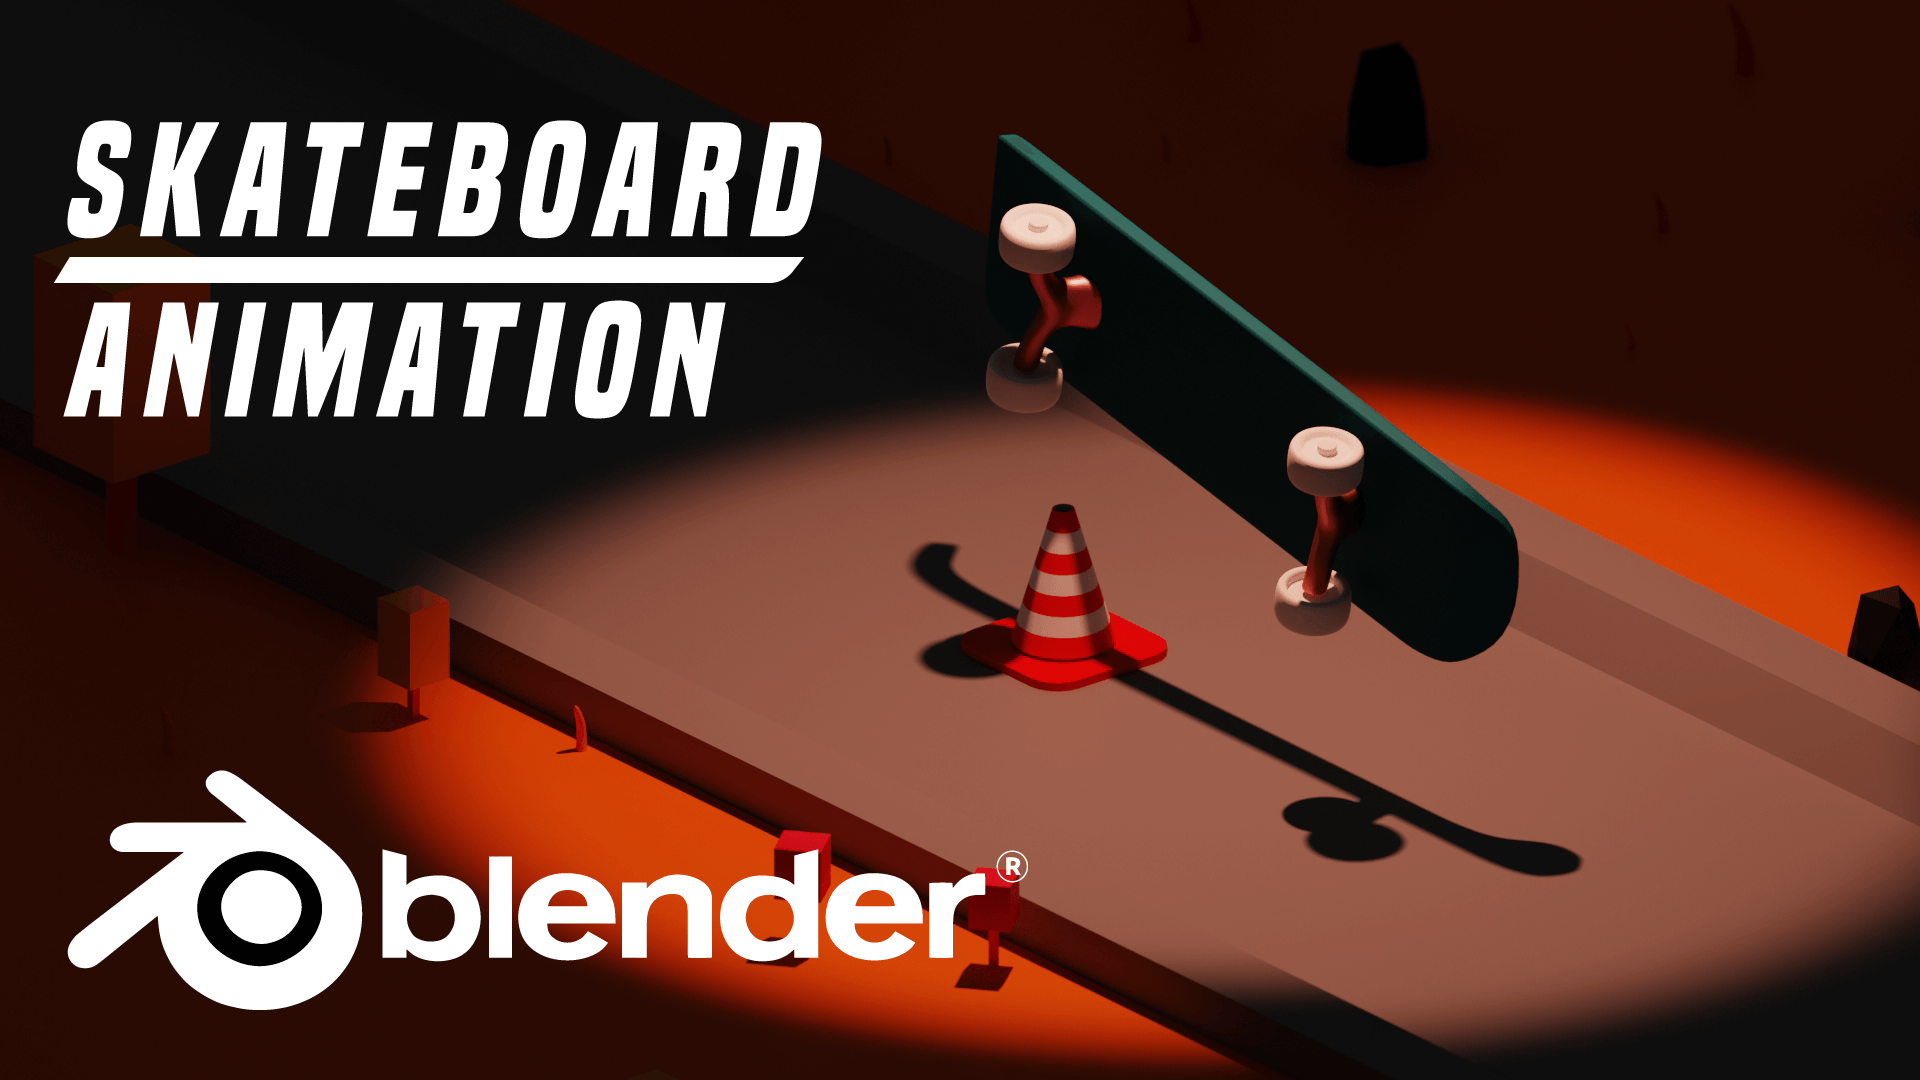 Skateboard Animation Course Blender .Learn how to animate in blender course.